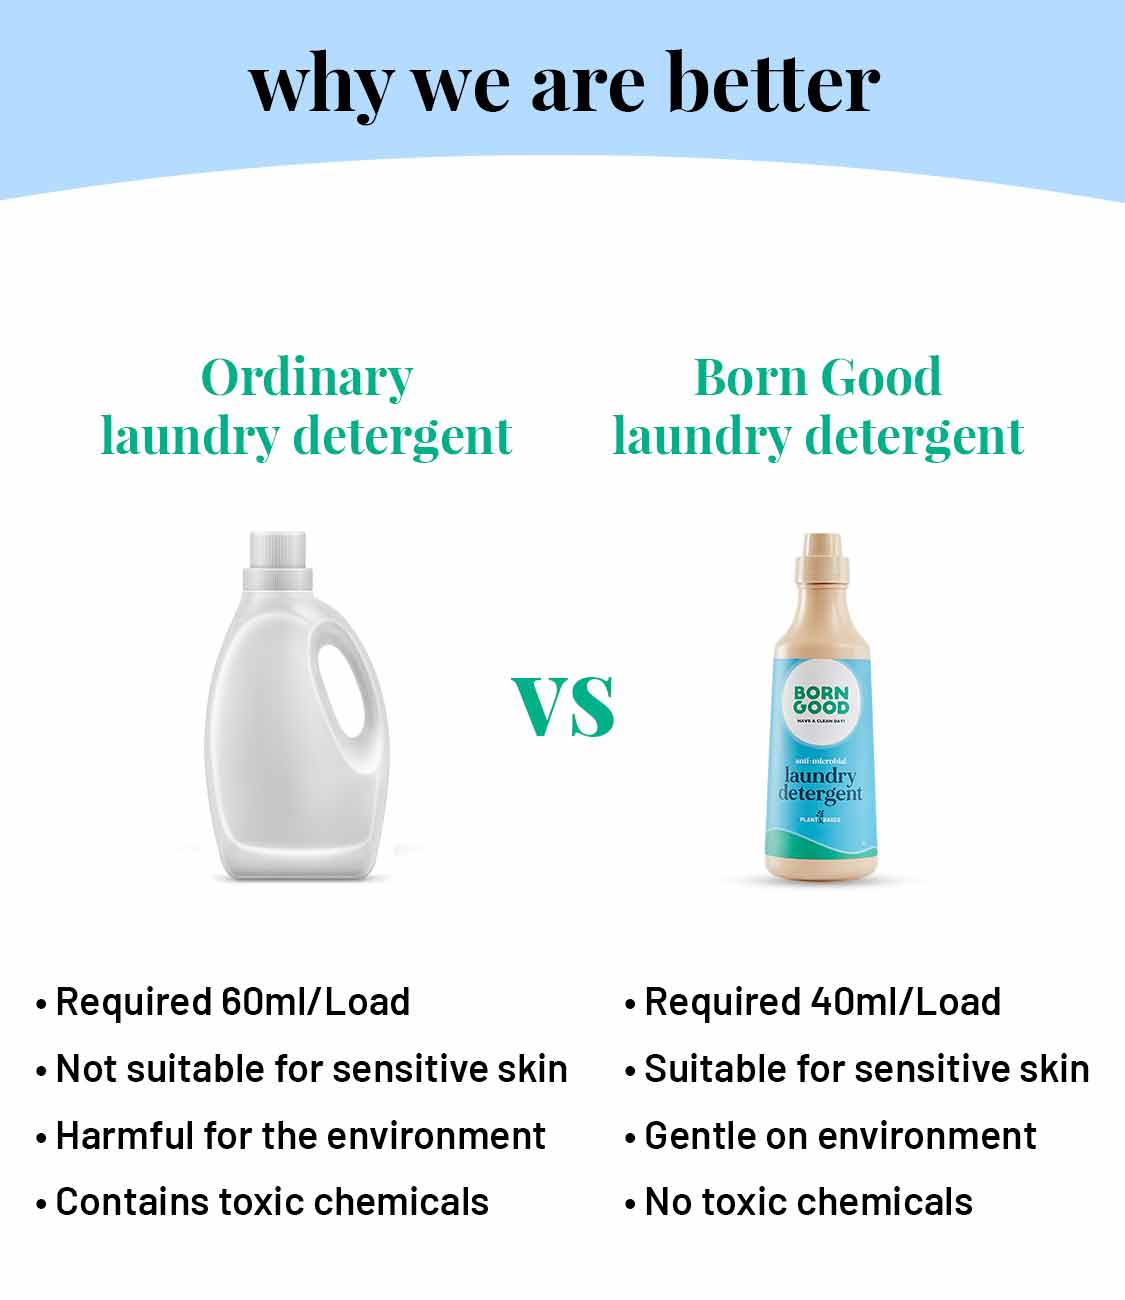 Born Good Plant-based Anti Microbial Laundry Detergent - 1 L Bottle